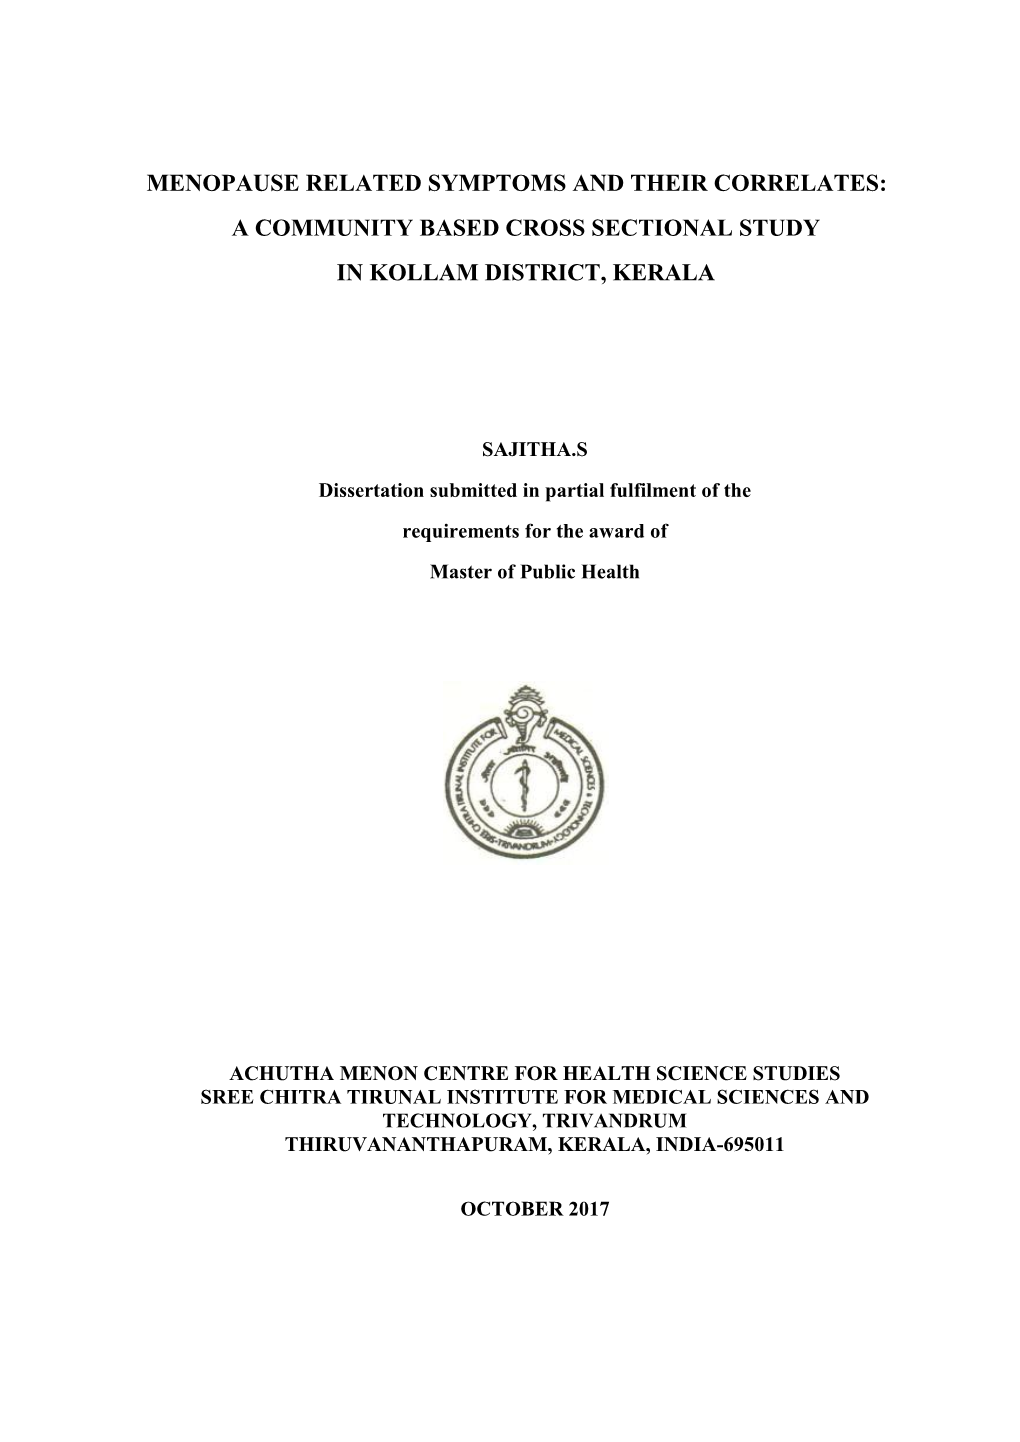 A Community Based Cross Sectional Study in Kollam District, Kerala